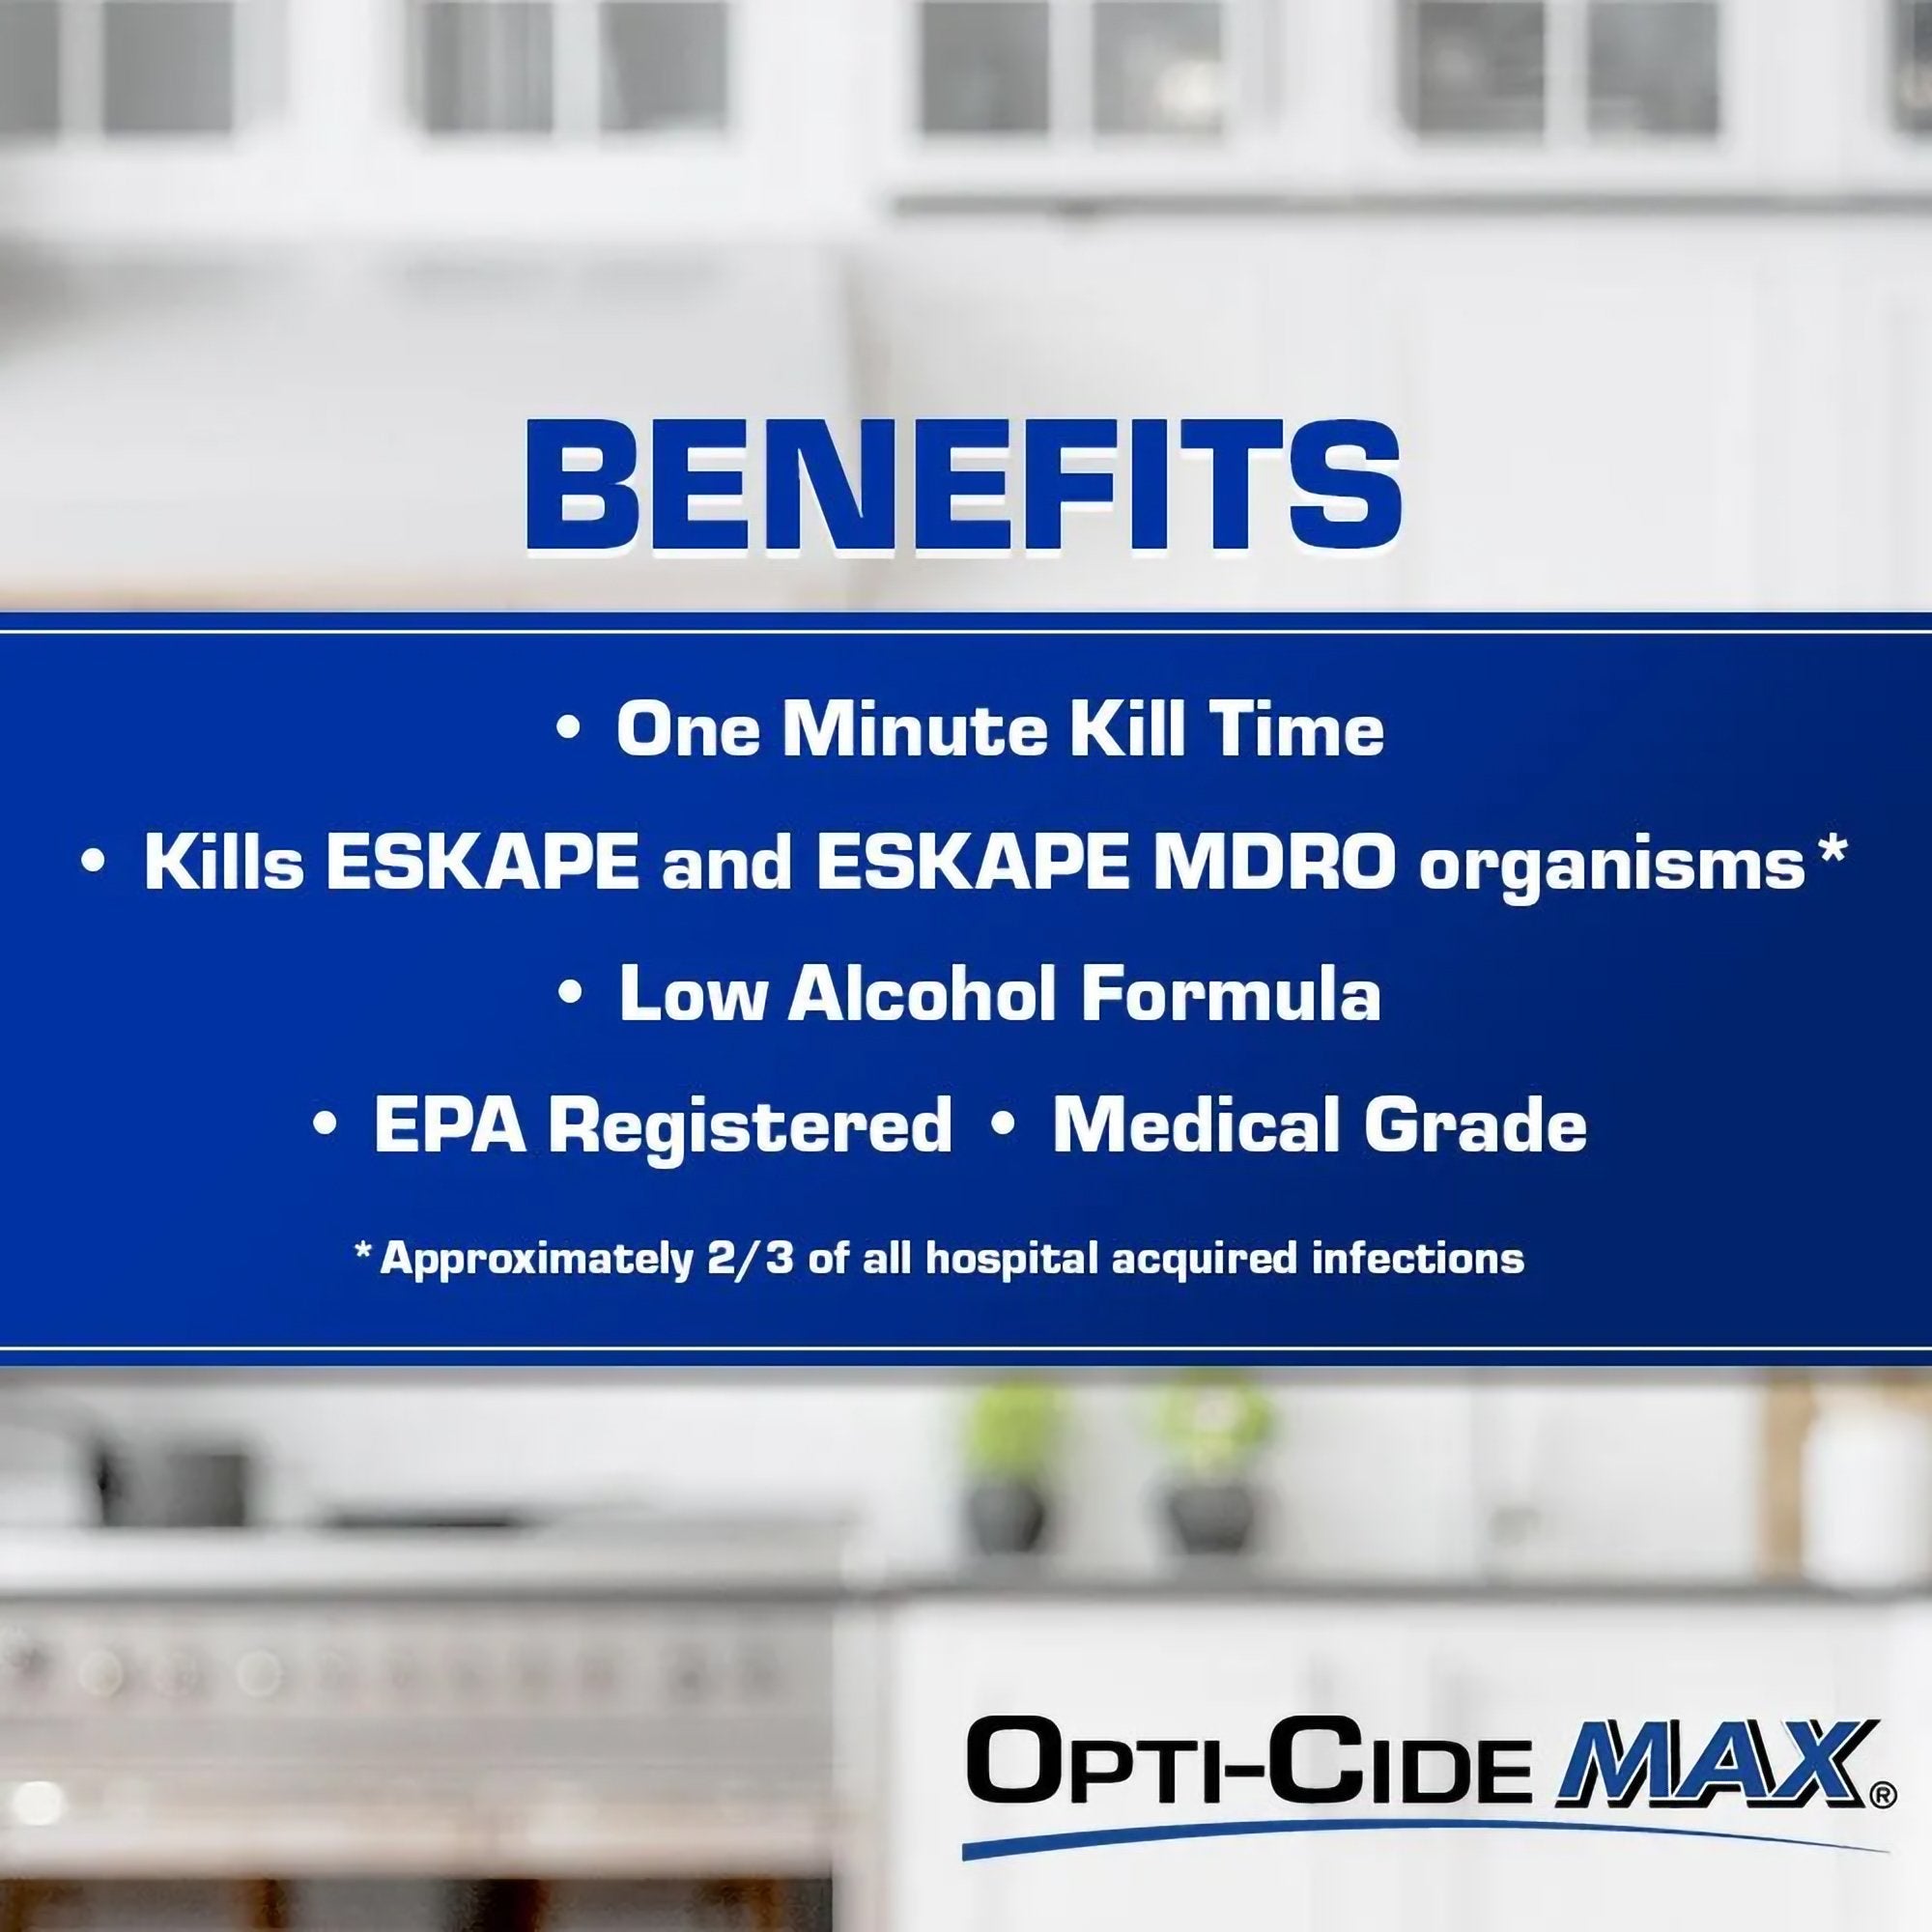 Opti-Cide? Max Surface Disinfectant Cleaner Wipes